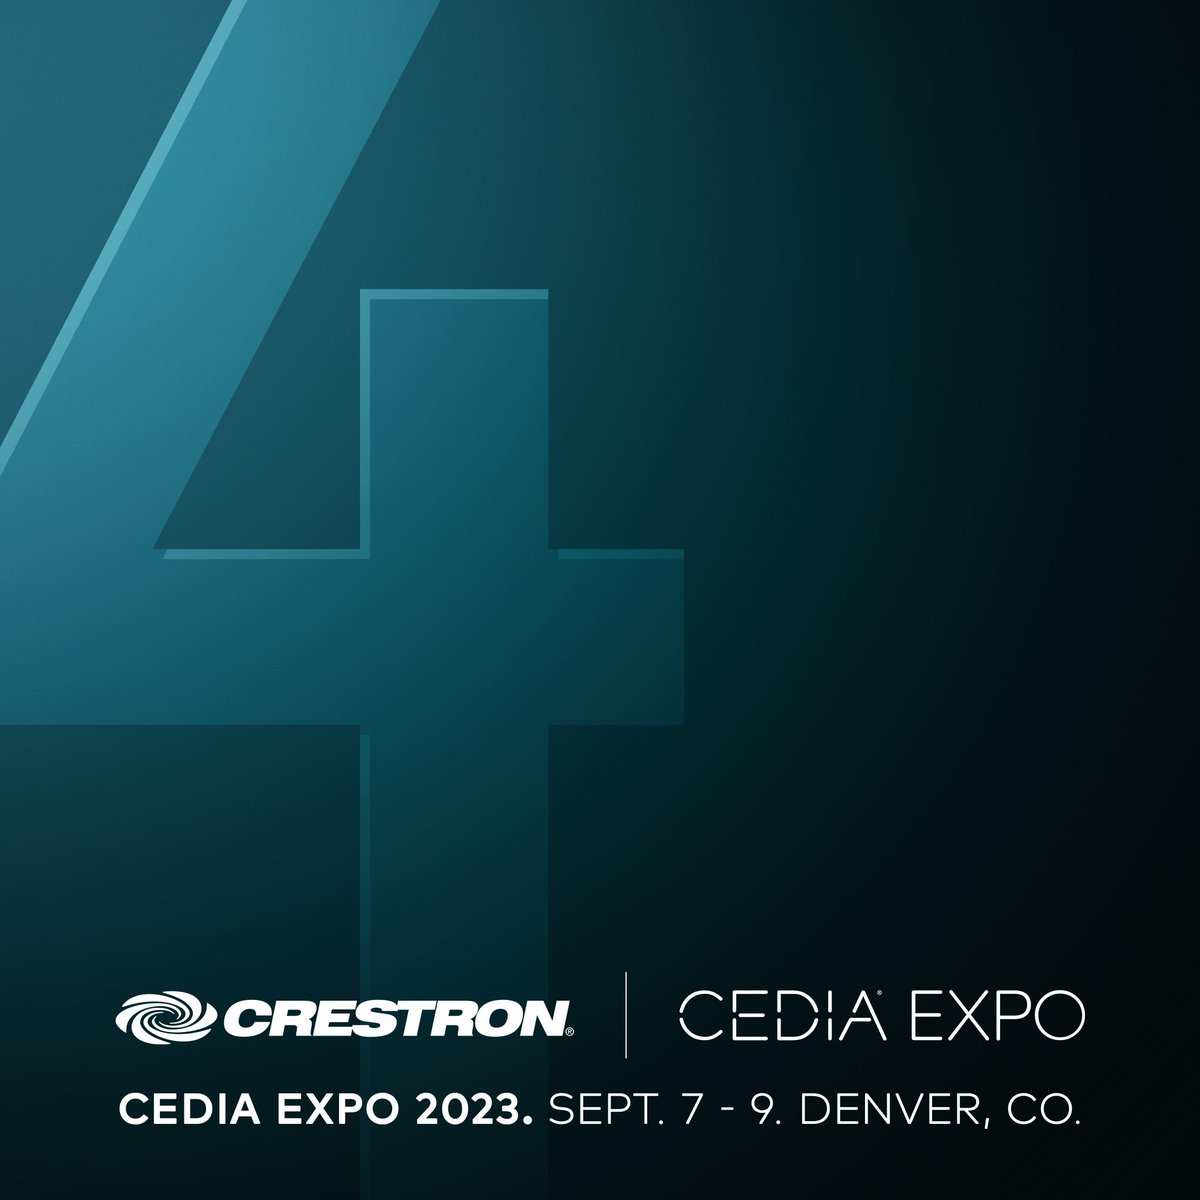 Everyone’s idea of the perfect smart home is different. Stop by CEDIA to discuss your perfect smart home and get a personal demo of Crestron Solutions. #CrestronCEDIA2023 #CEDIA2023  

Register now using code CRE25 for a FREE exhibit hall pass.  

ow.ly/wqIe50Pau9B